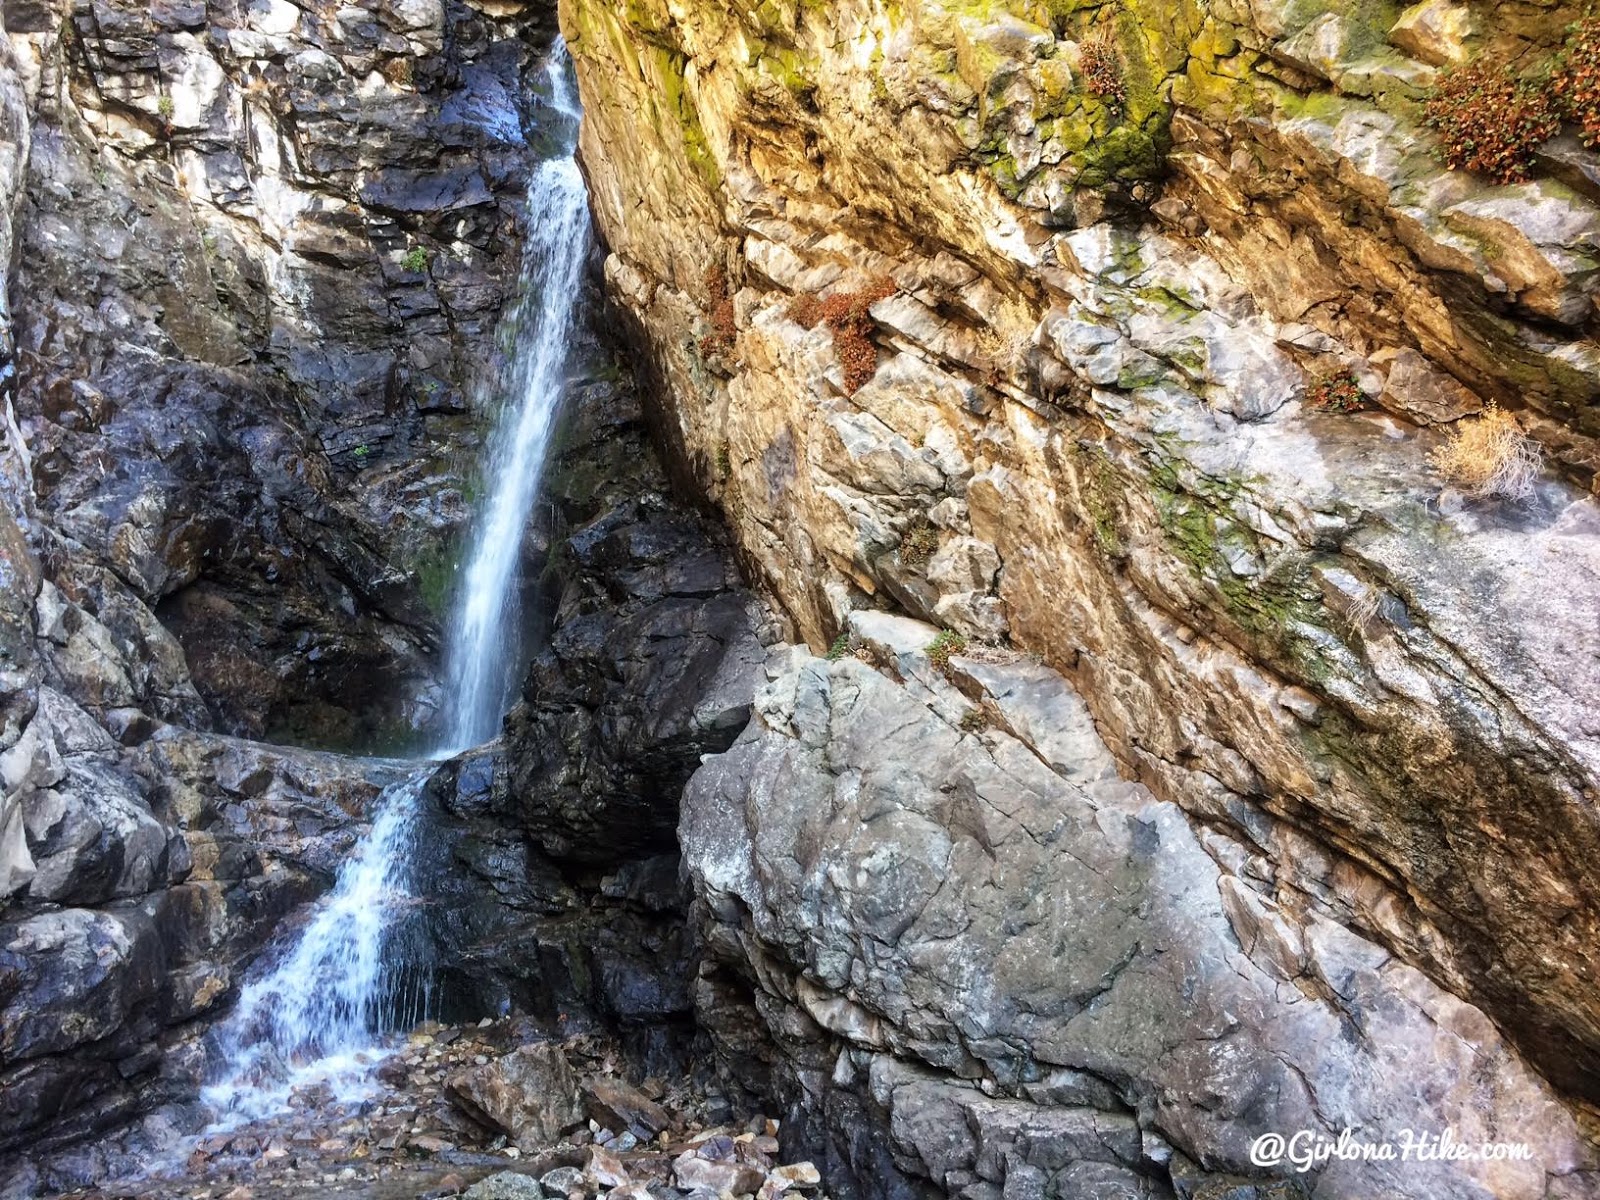 Hiking to Rocky Mouth Falls